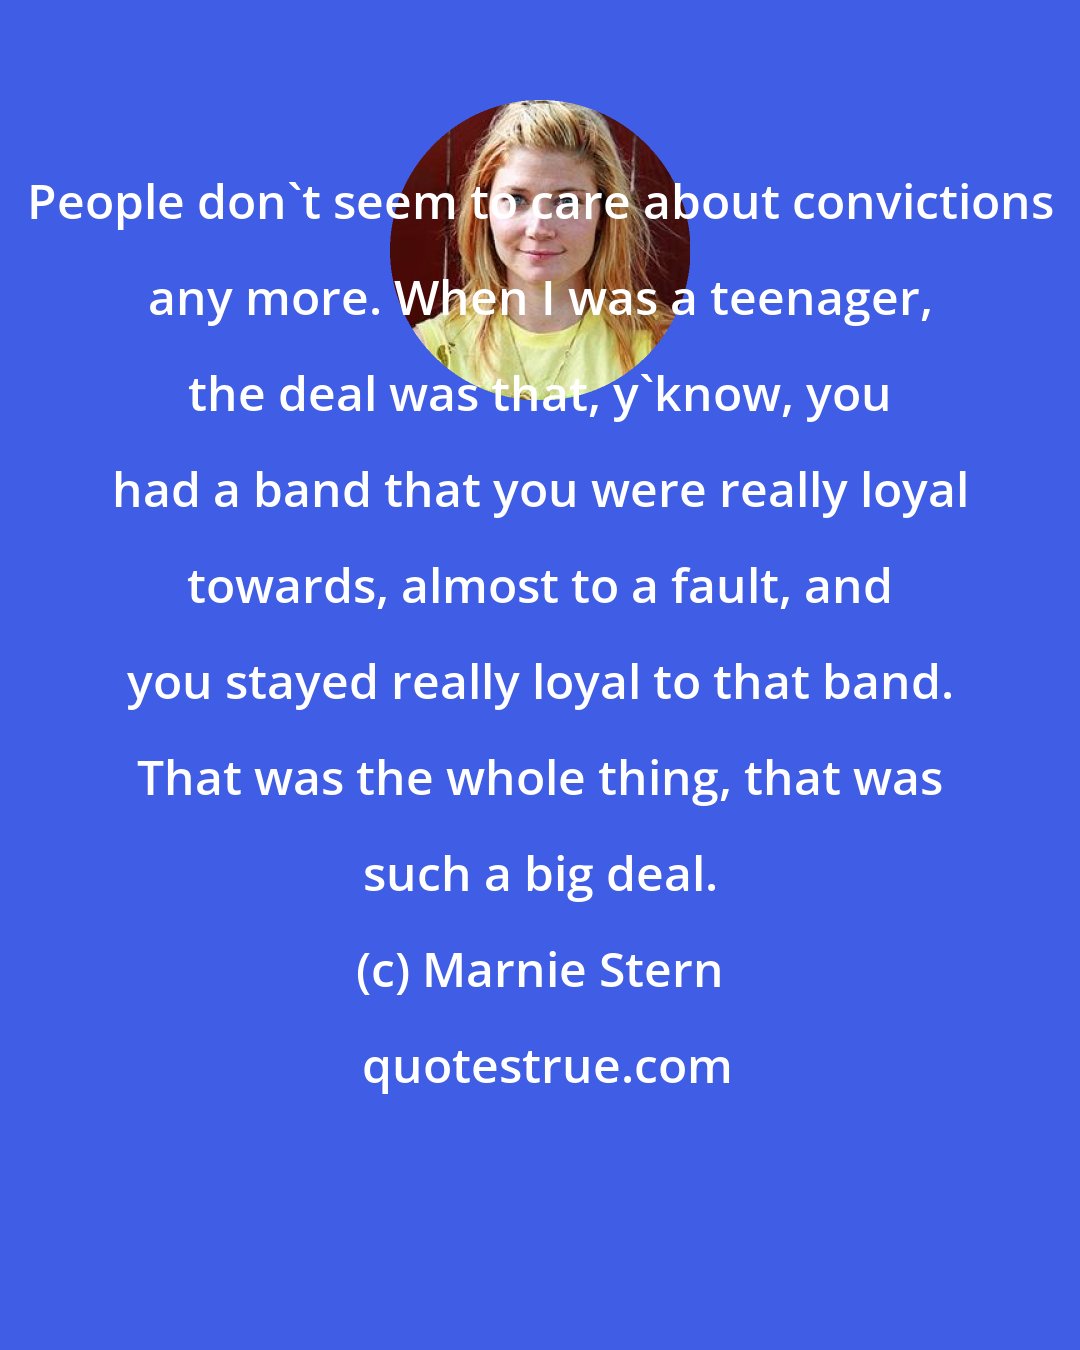 Marnie Stern: People don't seem to care about convictions any more. When I was a teenager, the deal was that, y'know, you had a band that you were really loyal towards, almost to a fault, and you stayed really loyal to that band. That was the whole thing, that was such a big deal.